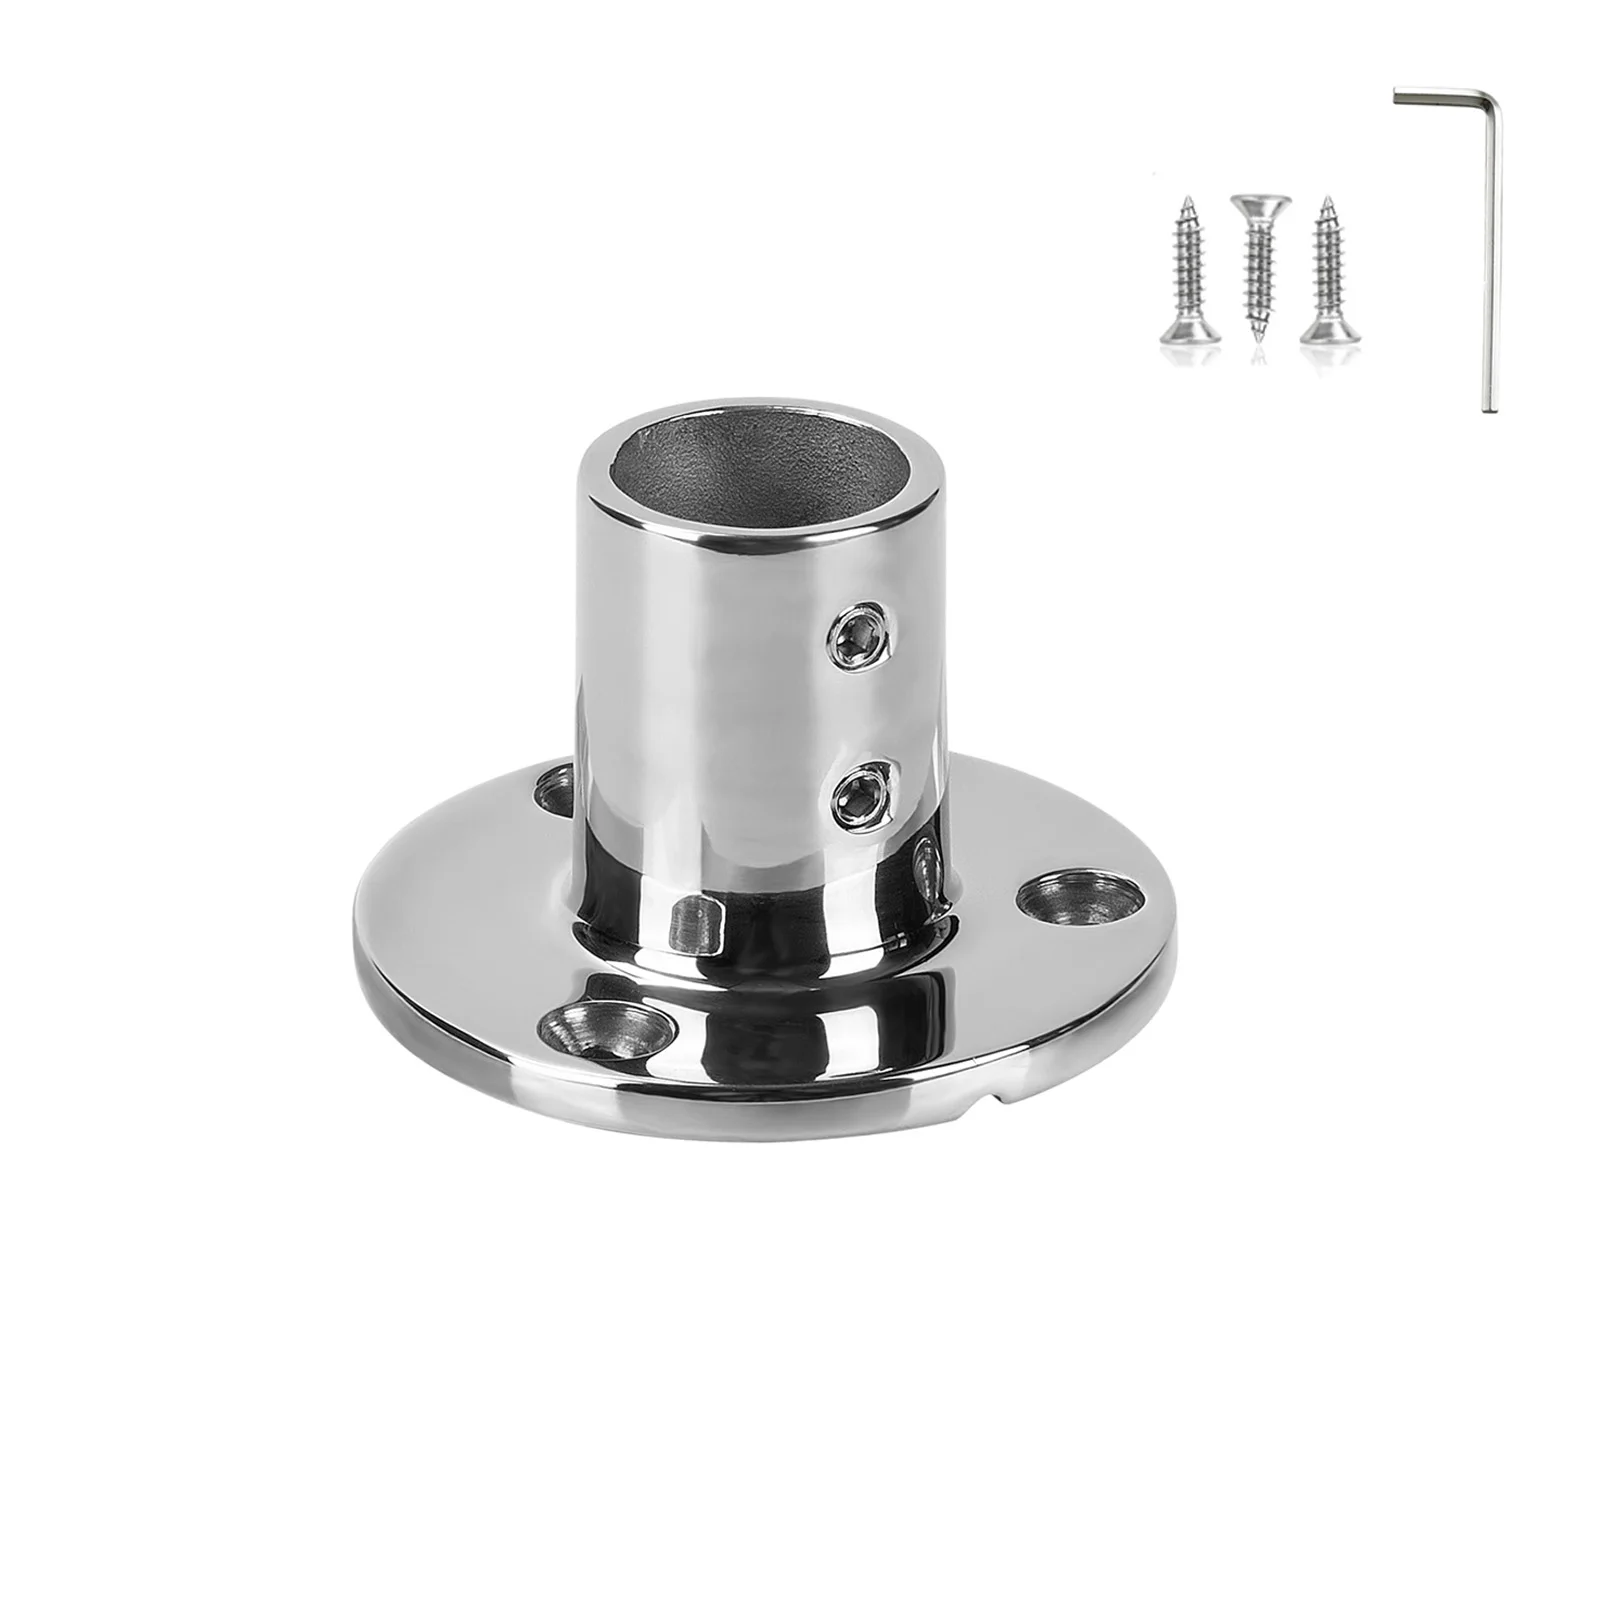 Marine Grade Boat Hand Rail Base, Durable, Versatile Application, 316 Ss Round 90 Degree Base Rail Fitting for 7/8 inch Tube 7 9 inch universal base for circular saw to be used for guide rail tracks